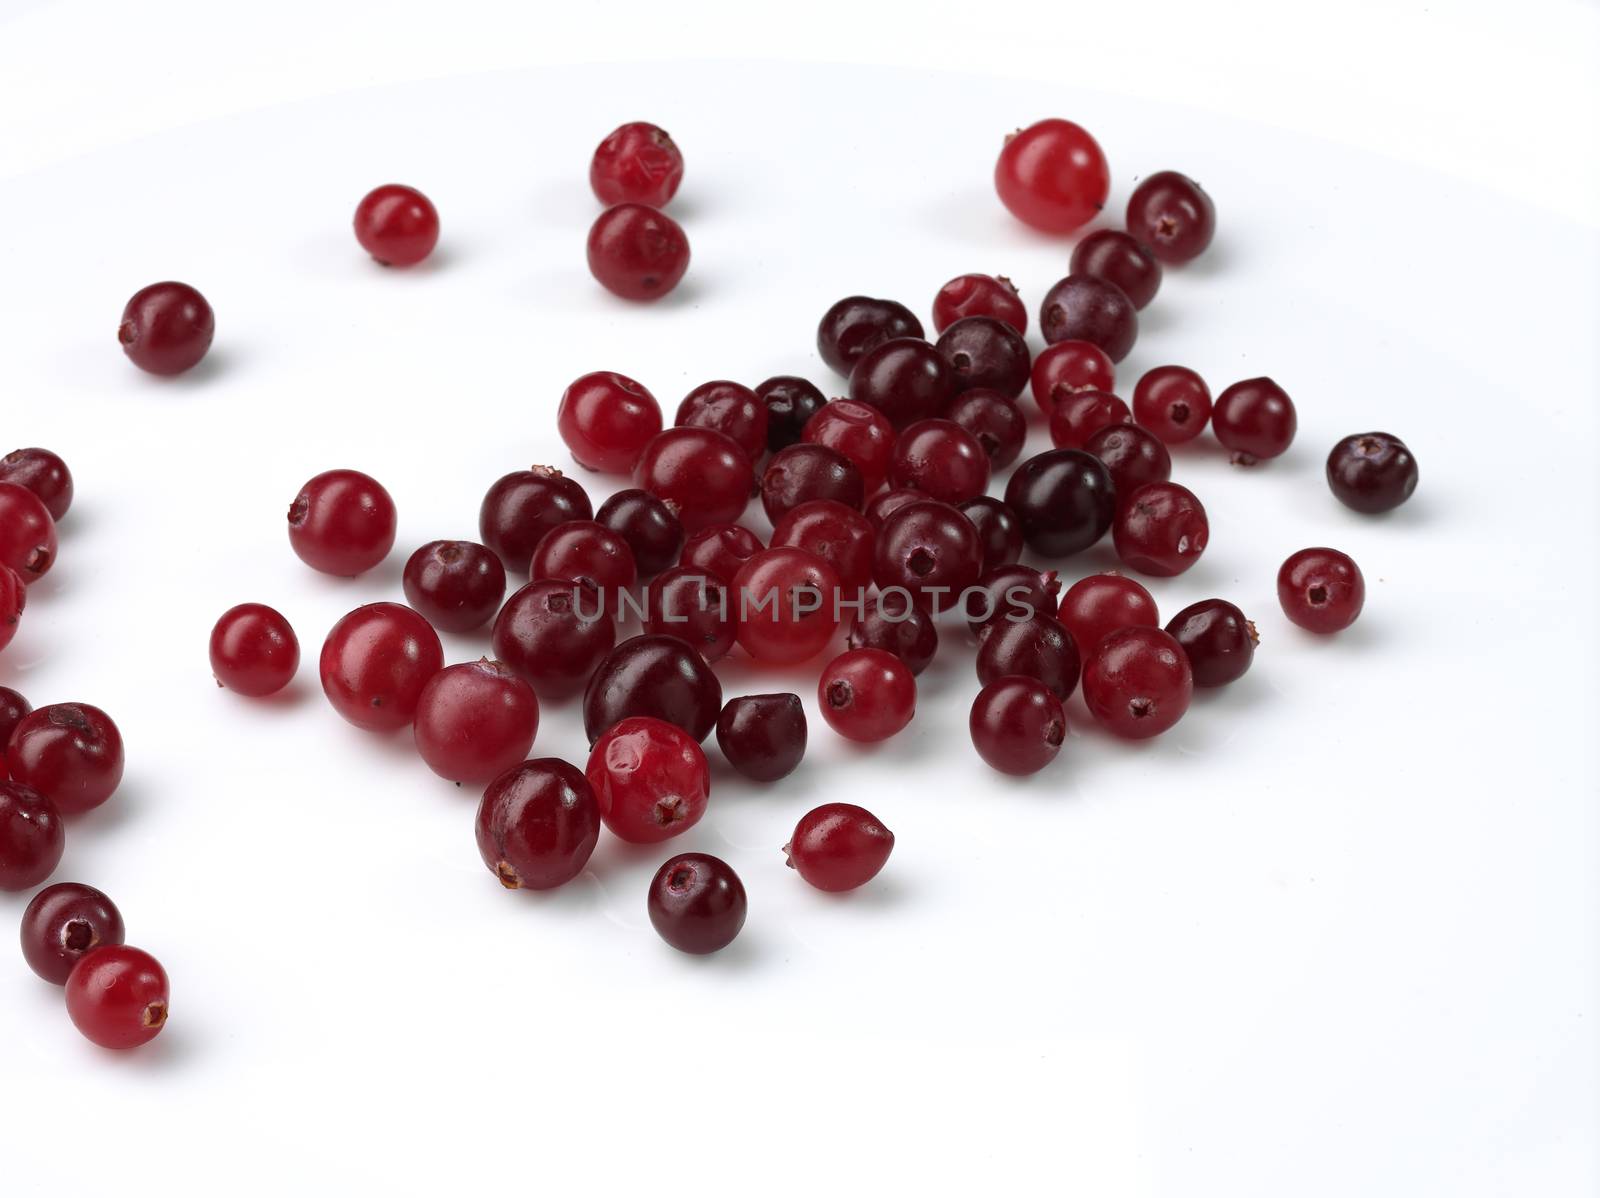 Tasty Cranberry berries over white background